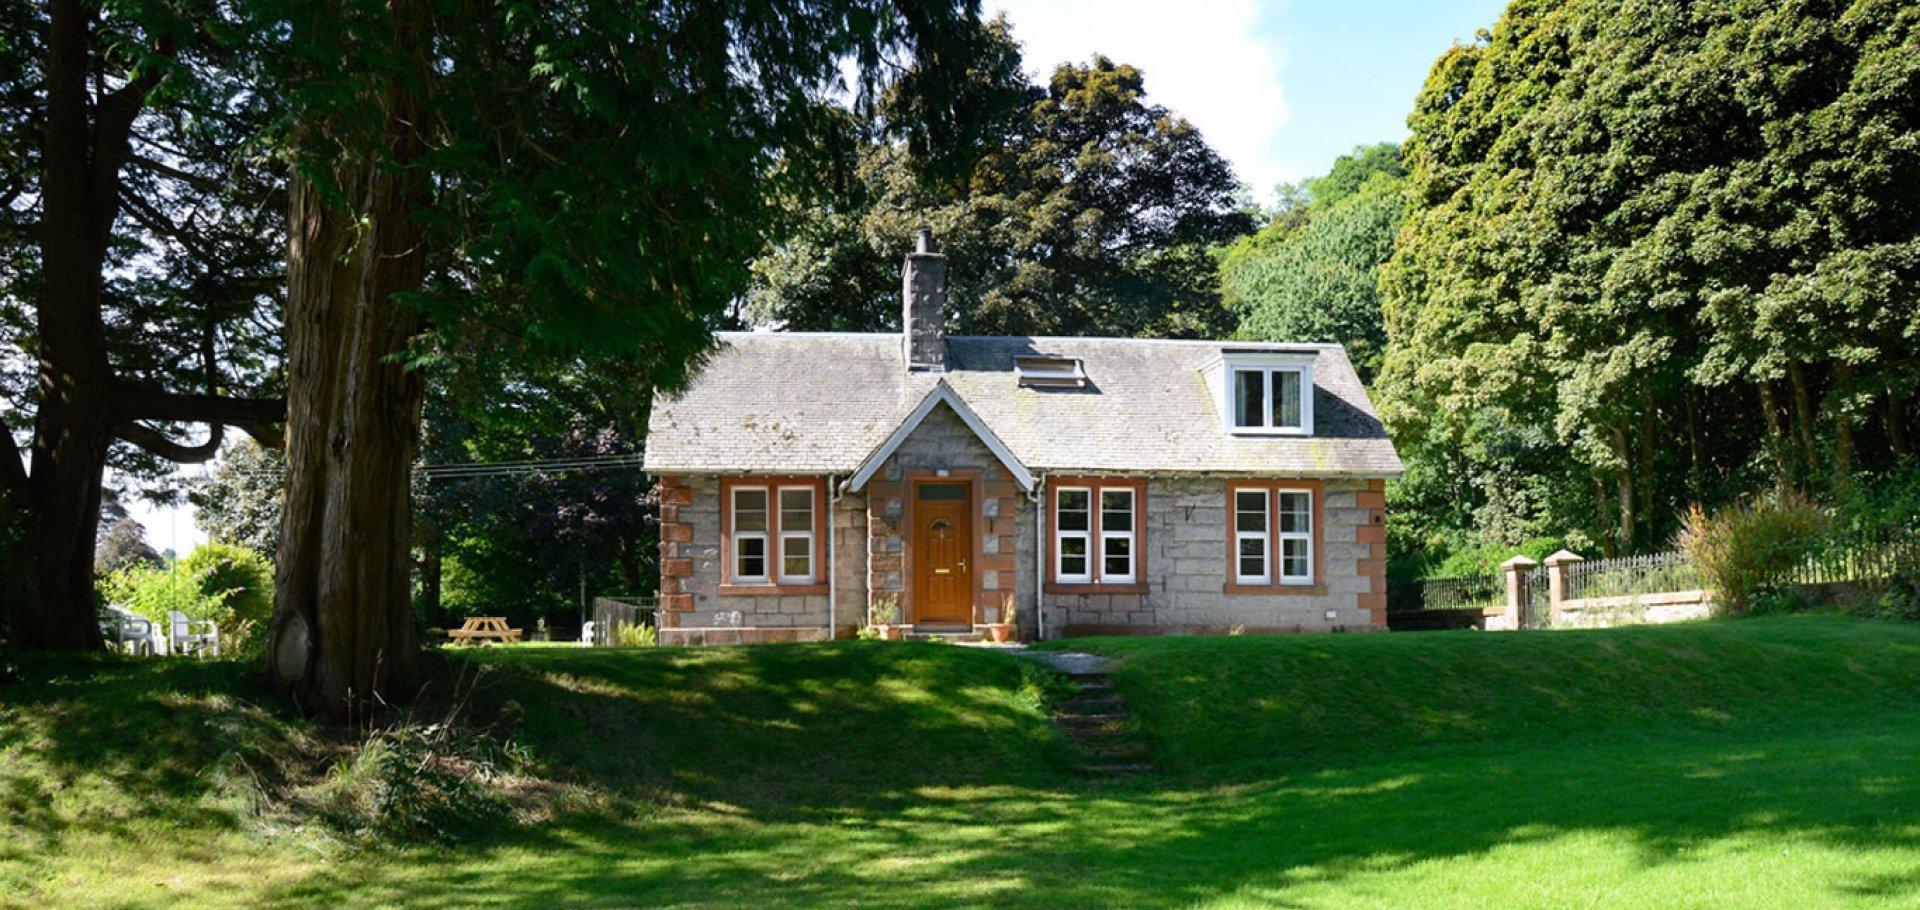 The Lodge self catering holiday accommodation near castle douglas dumfries and galloway